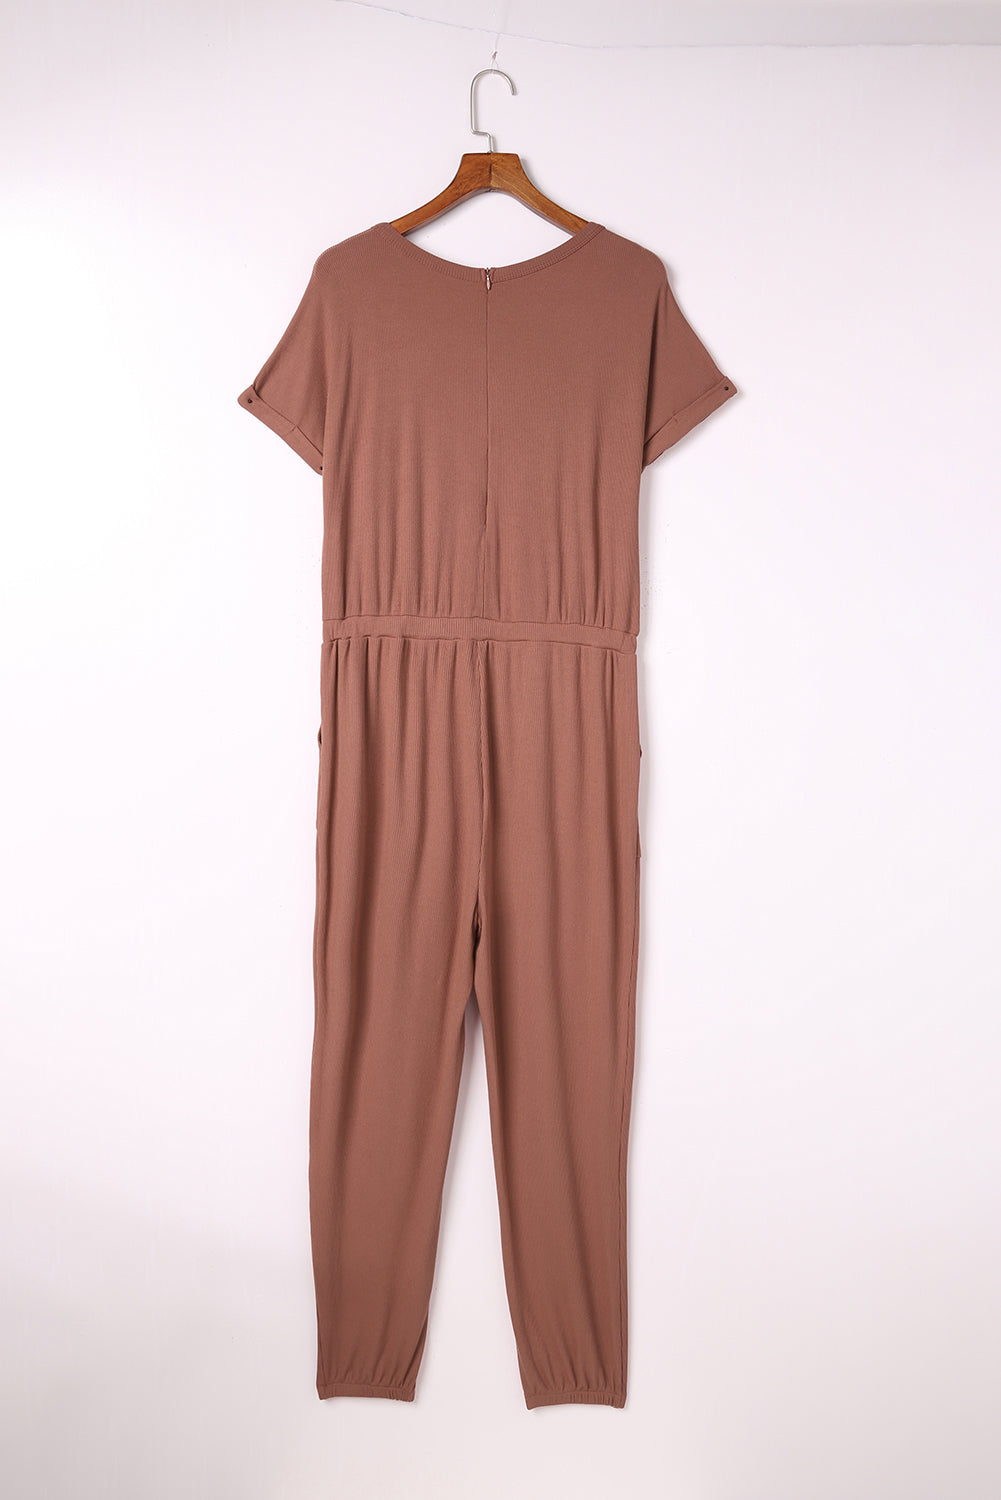 Women's Mauve HANNA Ribbed Short Sleeve Jumpsuit with Pockets